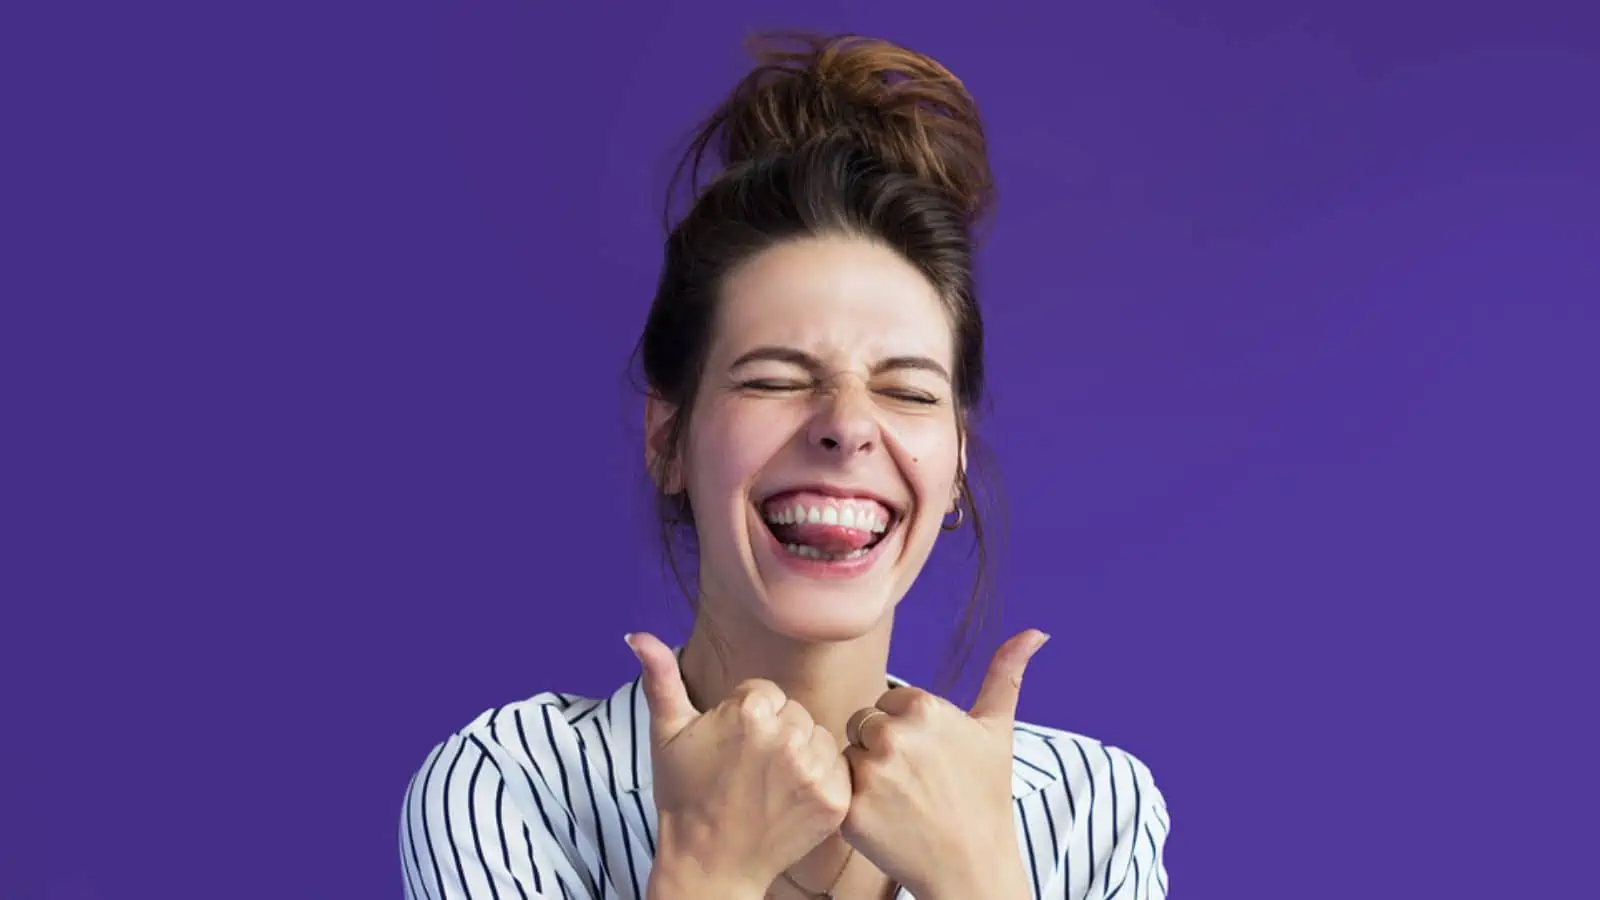 laughing excited woman showing thumbs up